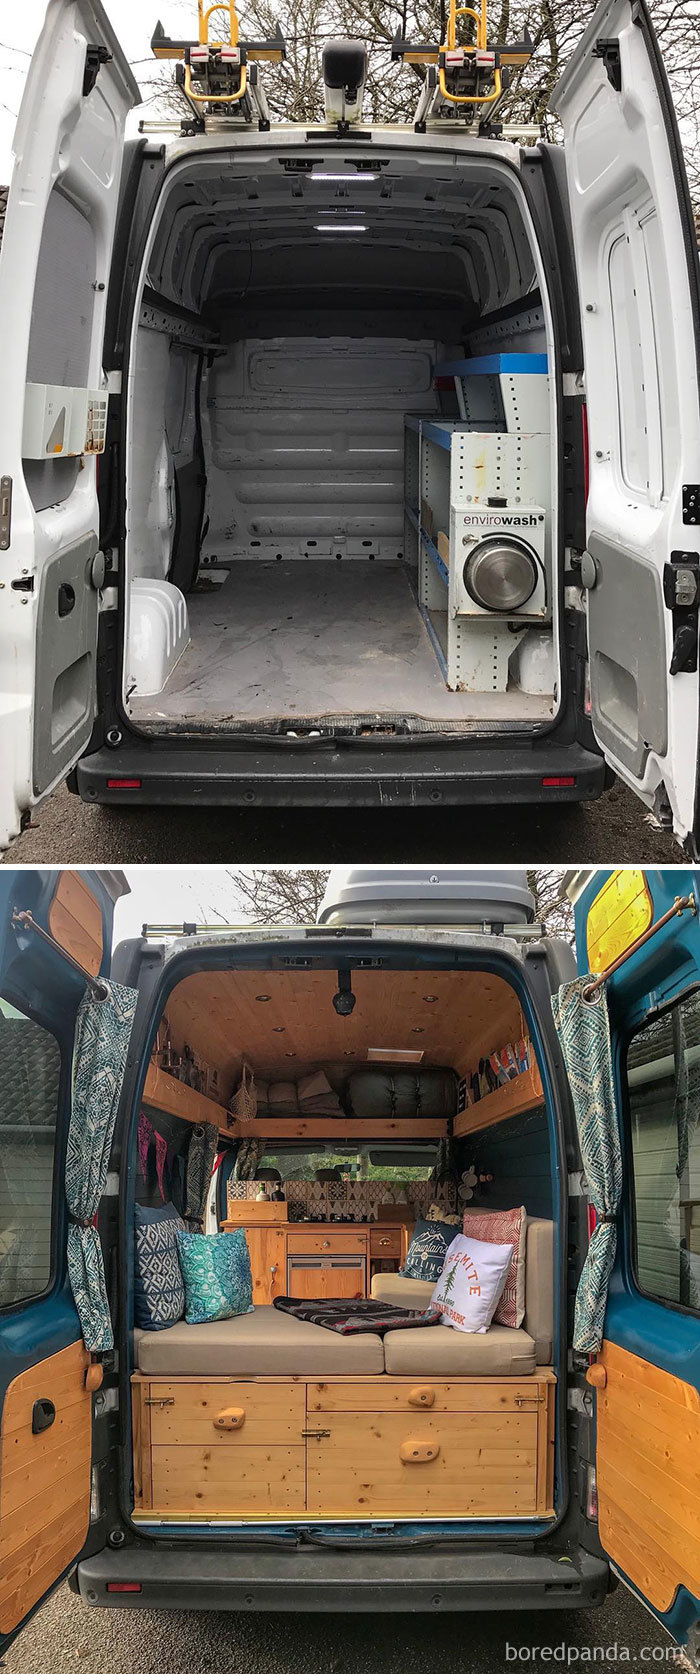 Then And Now. It’s 2 Years To The Day Since We Picked Up Our Little Van. Looks A Wee Bit Different Now